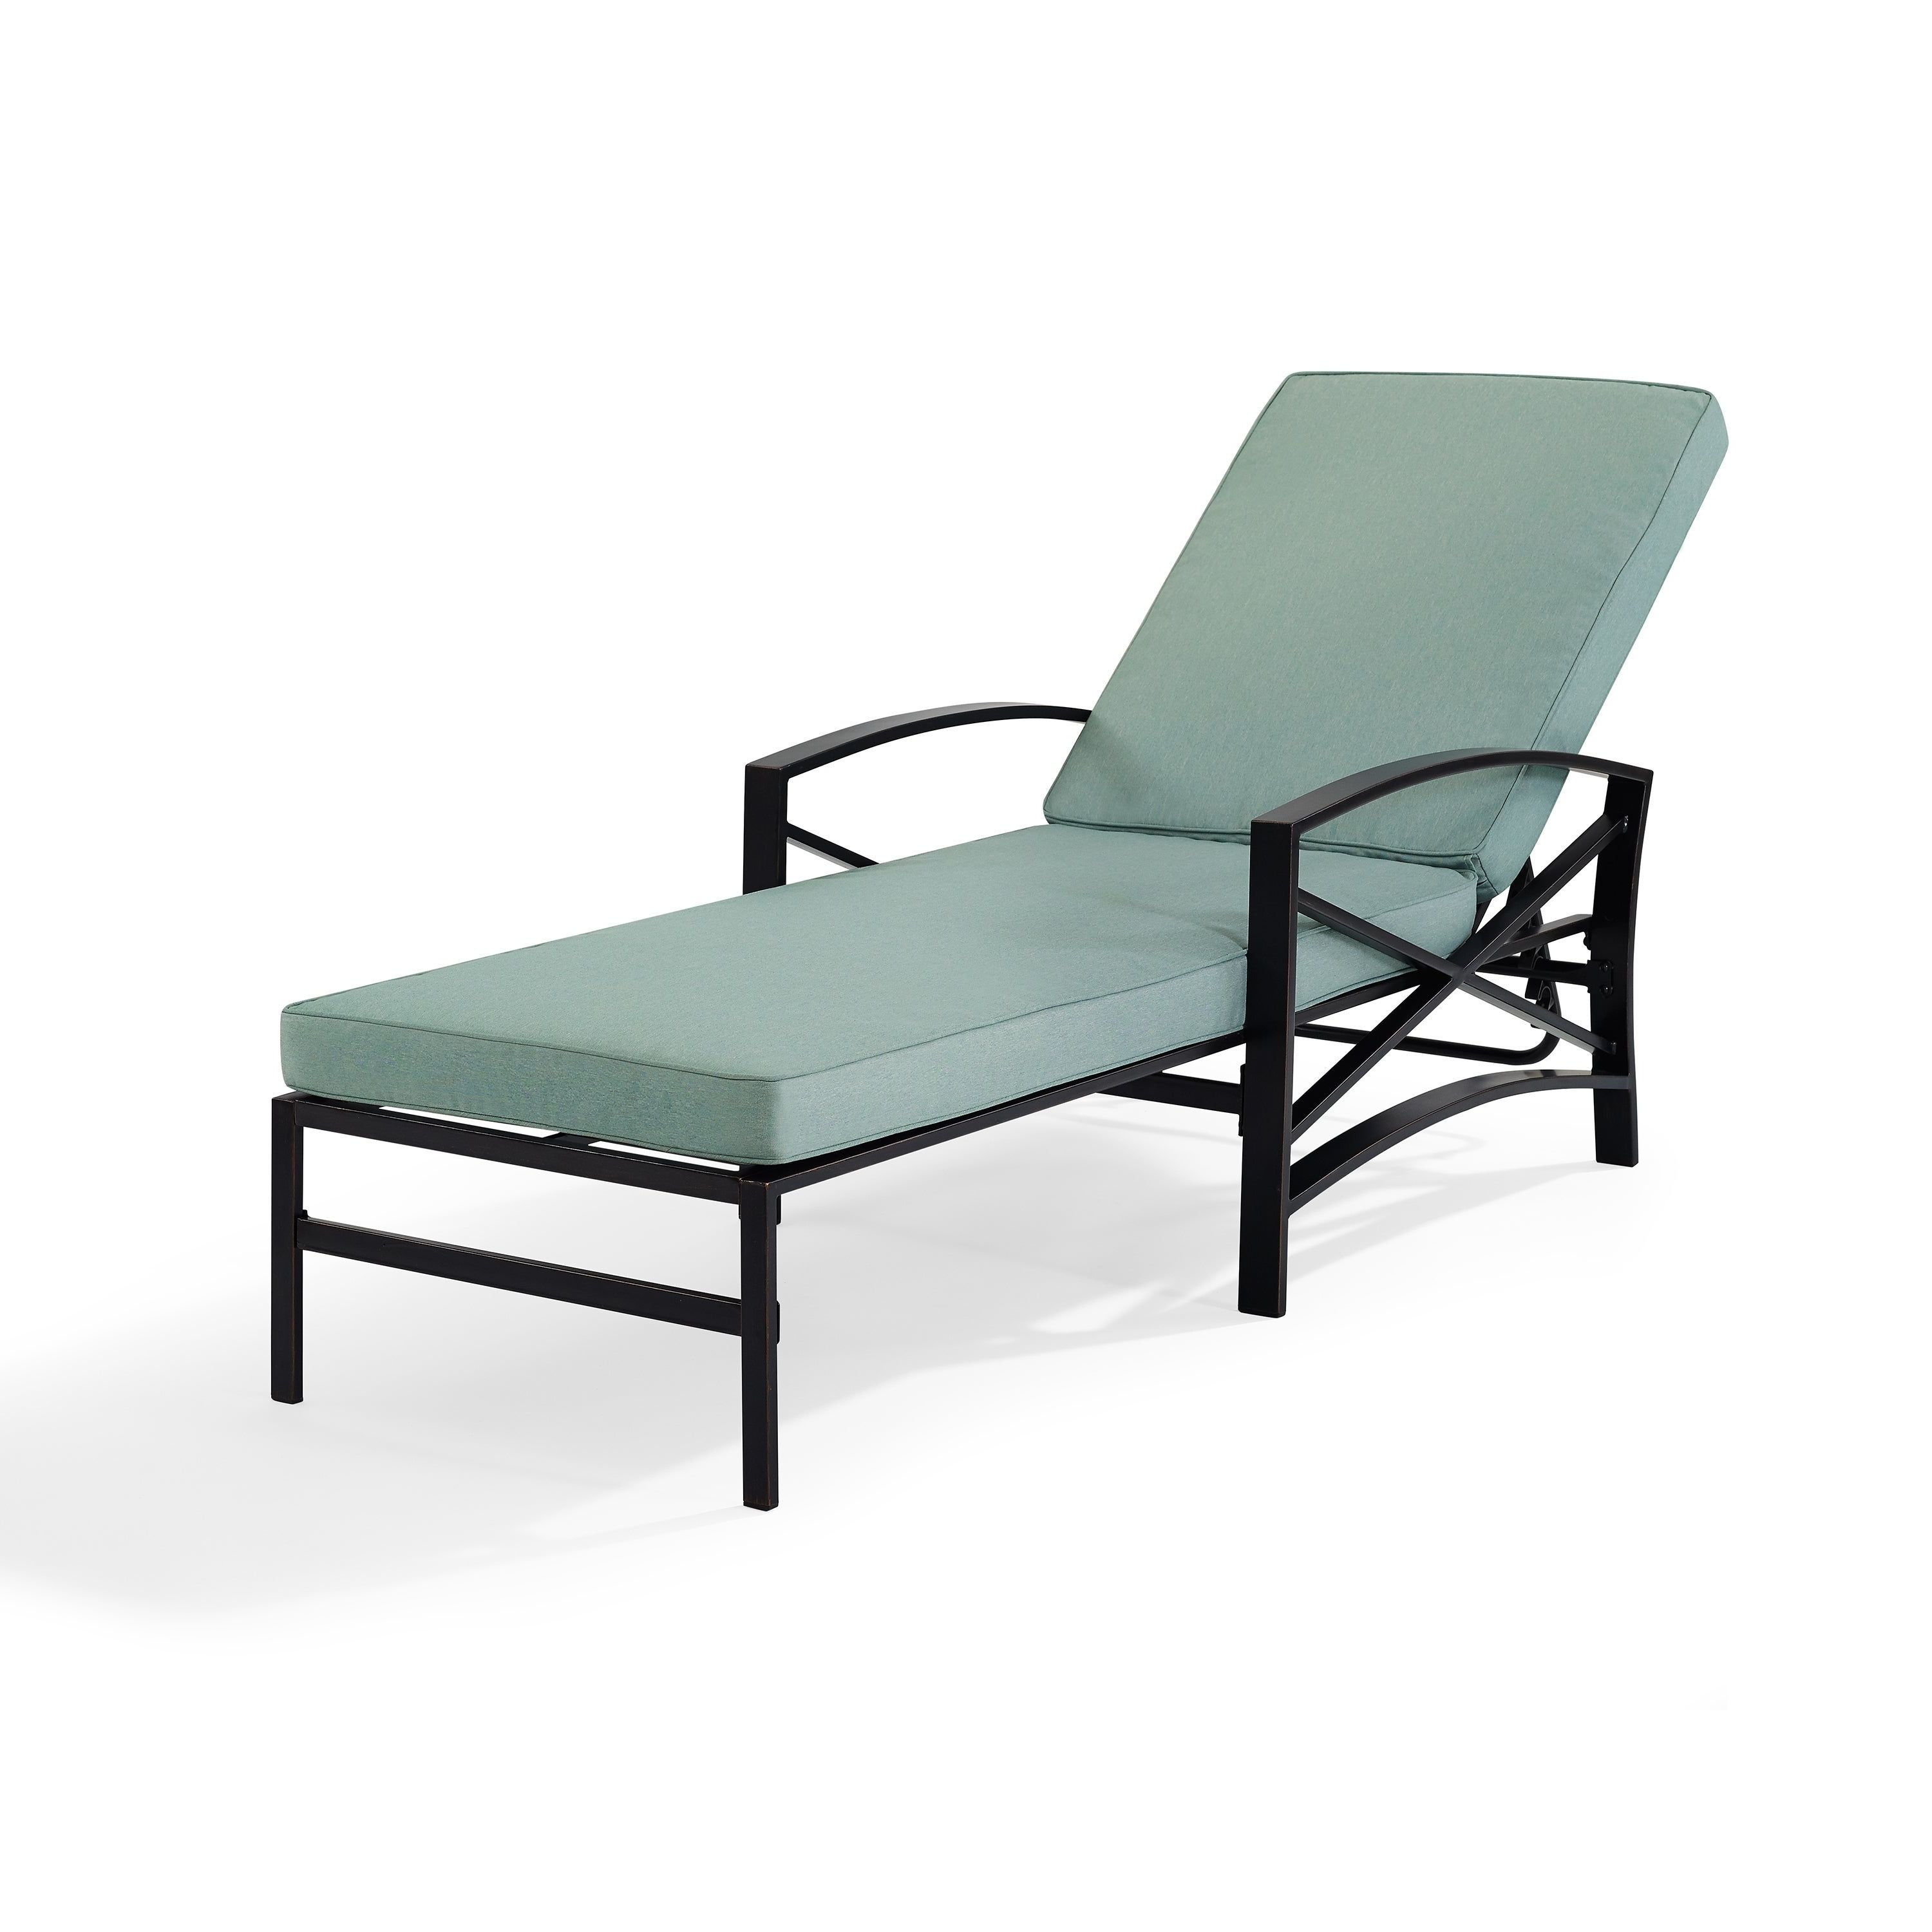 Havenside Home Davis Chaise Lounge Chair In Bronze With Mist Cushions Intended For Most Current Chaise Lounge Chairs In Bronze With Mist Cushions (View 2 of 25)